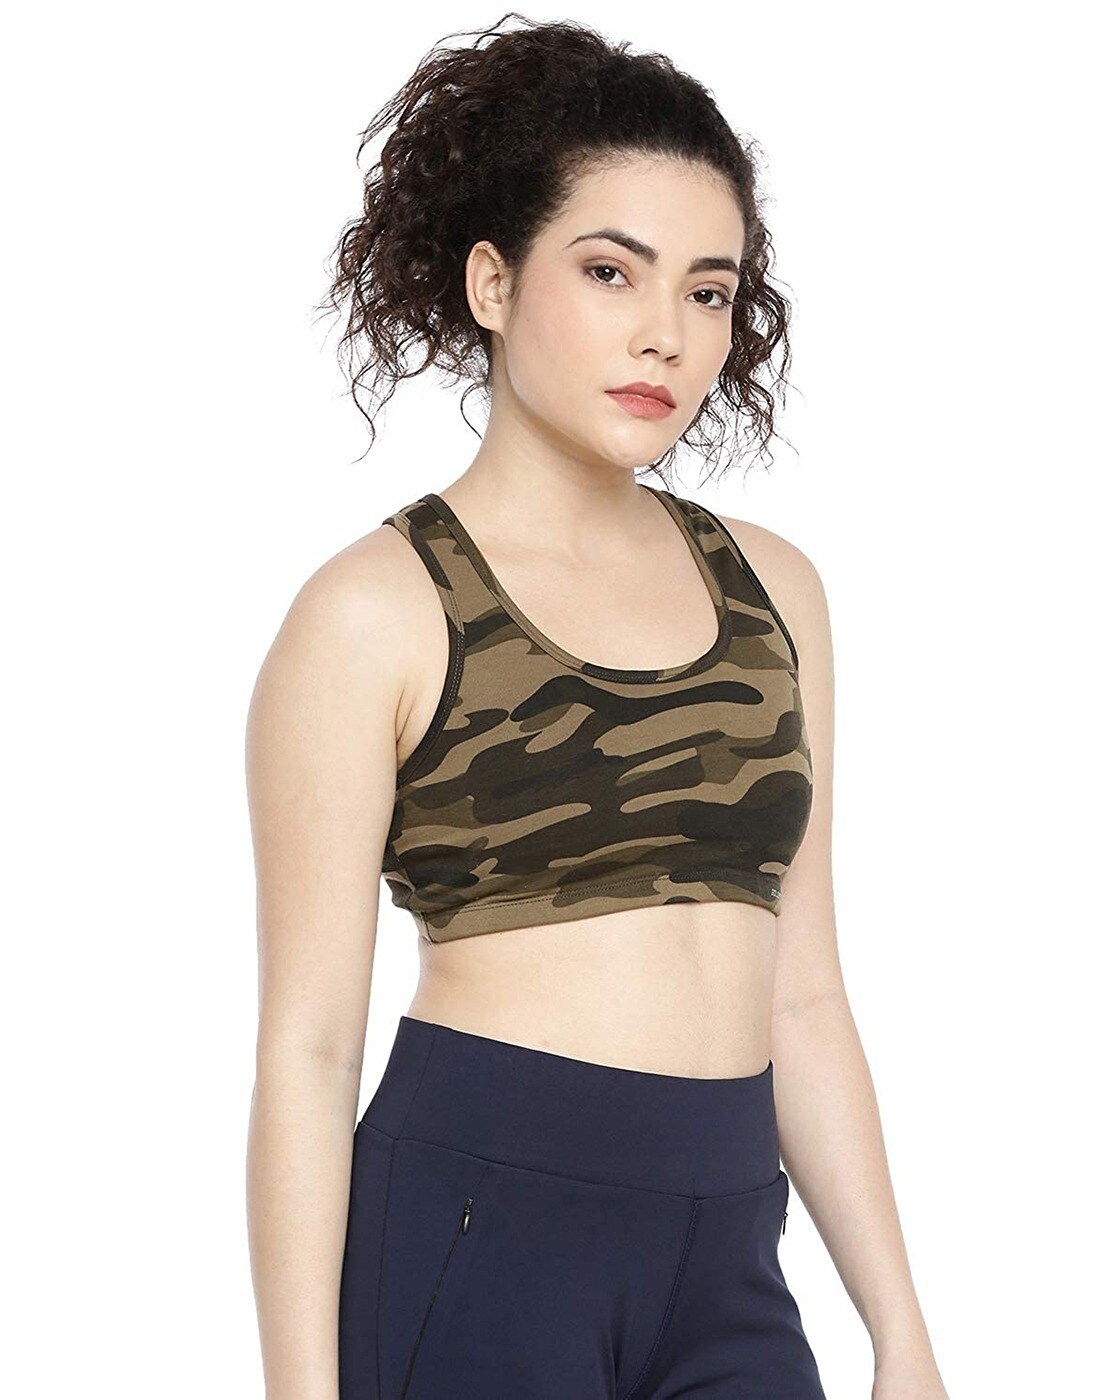 Army Camouflage Sports Bra For Women at Rs 699.00, Ladies Sports Bra